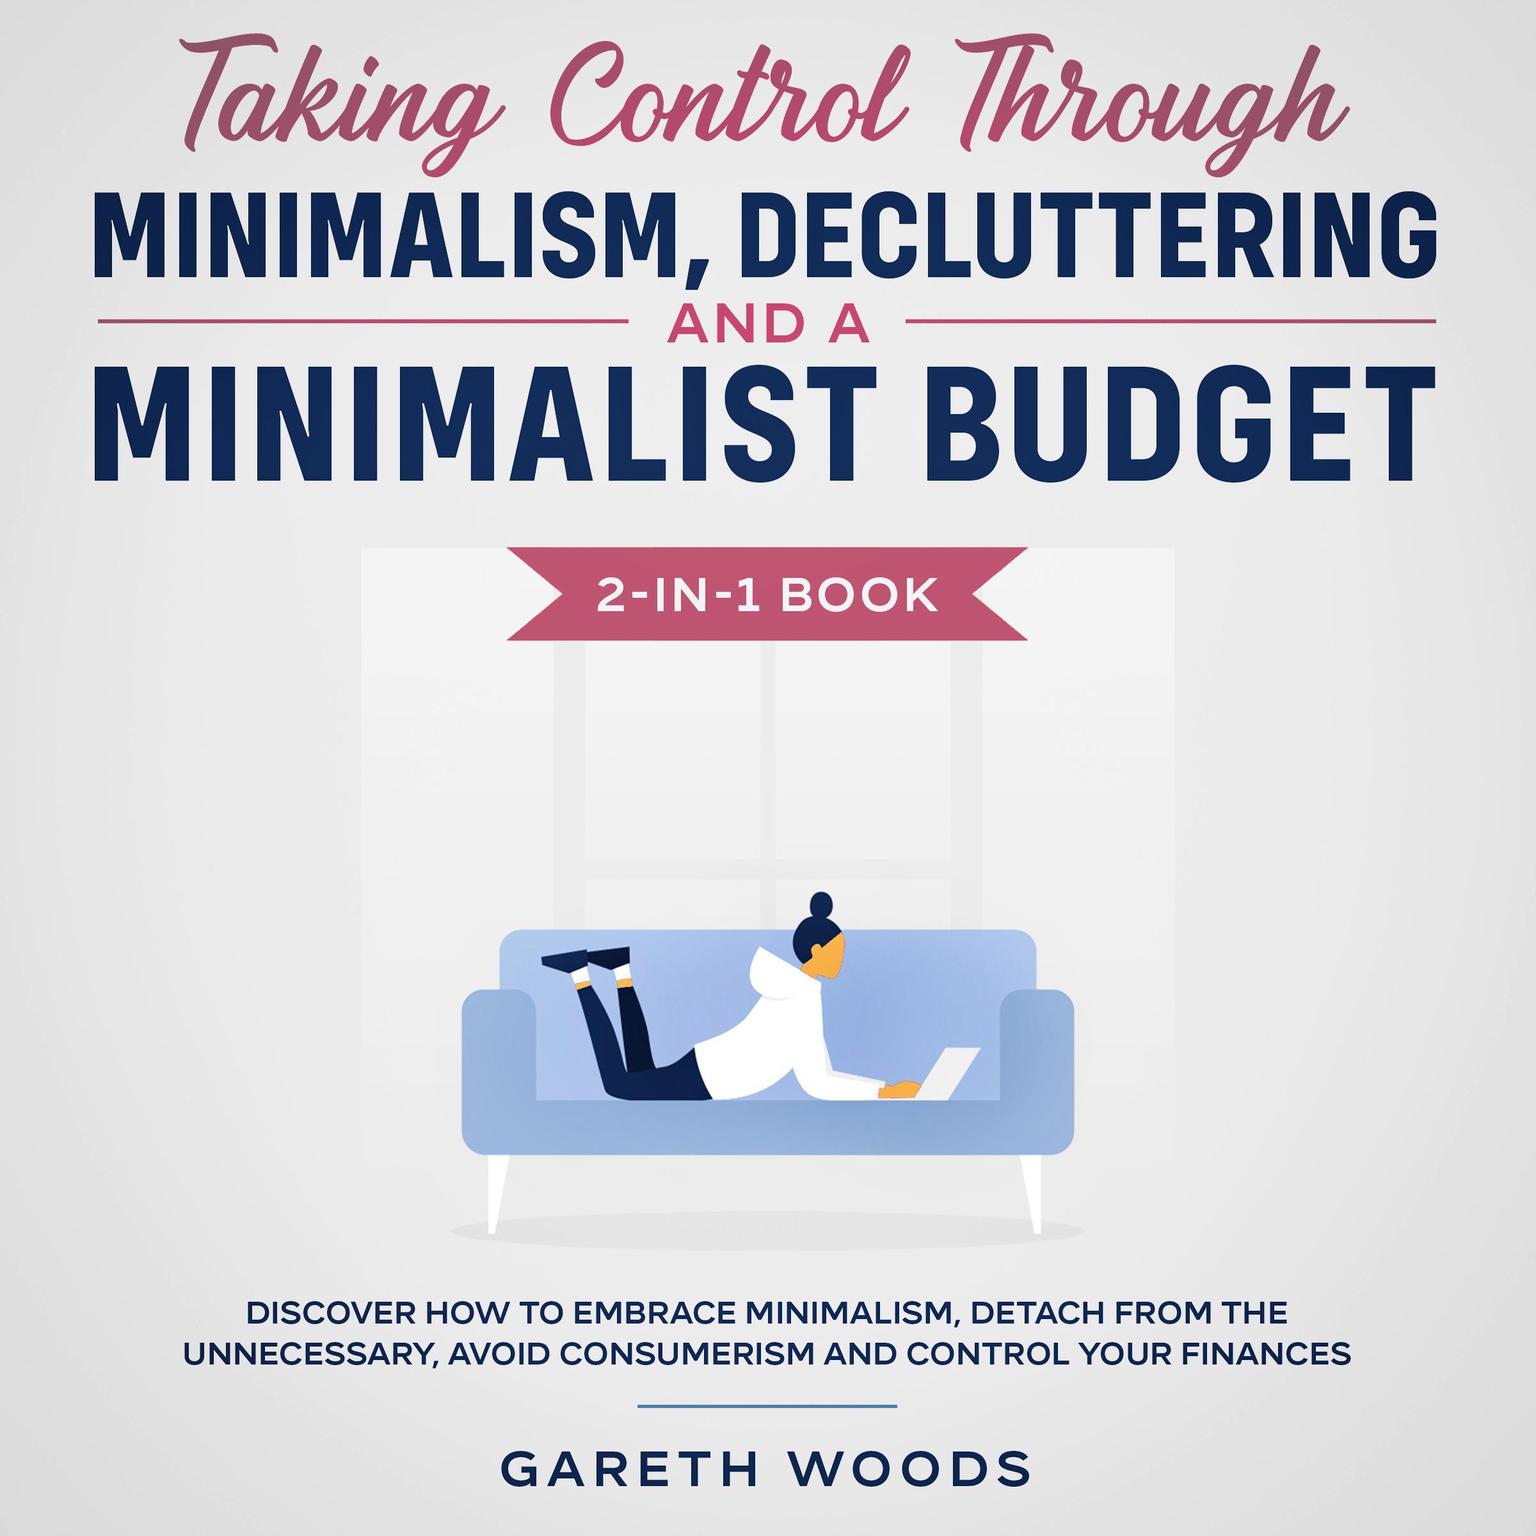 Taking Control Through Minimalism, Decluttering and a Minimalist Budget 2-in-1 Book Discover how to Embrace Minimalism, Detach from the Unnecessary, Avoid Consumerism and Control Your Finances Audiobook, by Gareth Woods